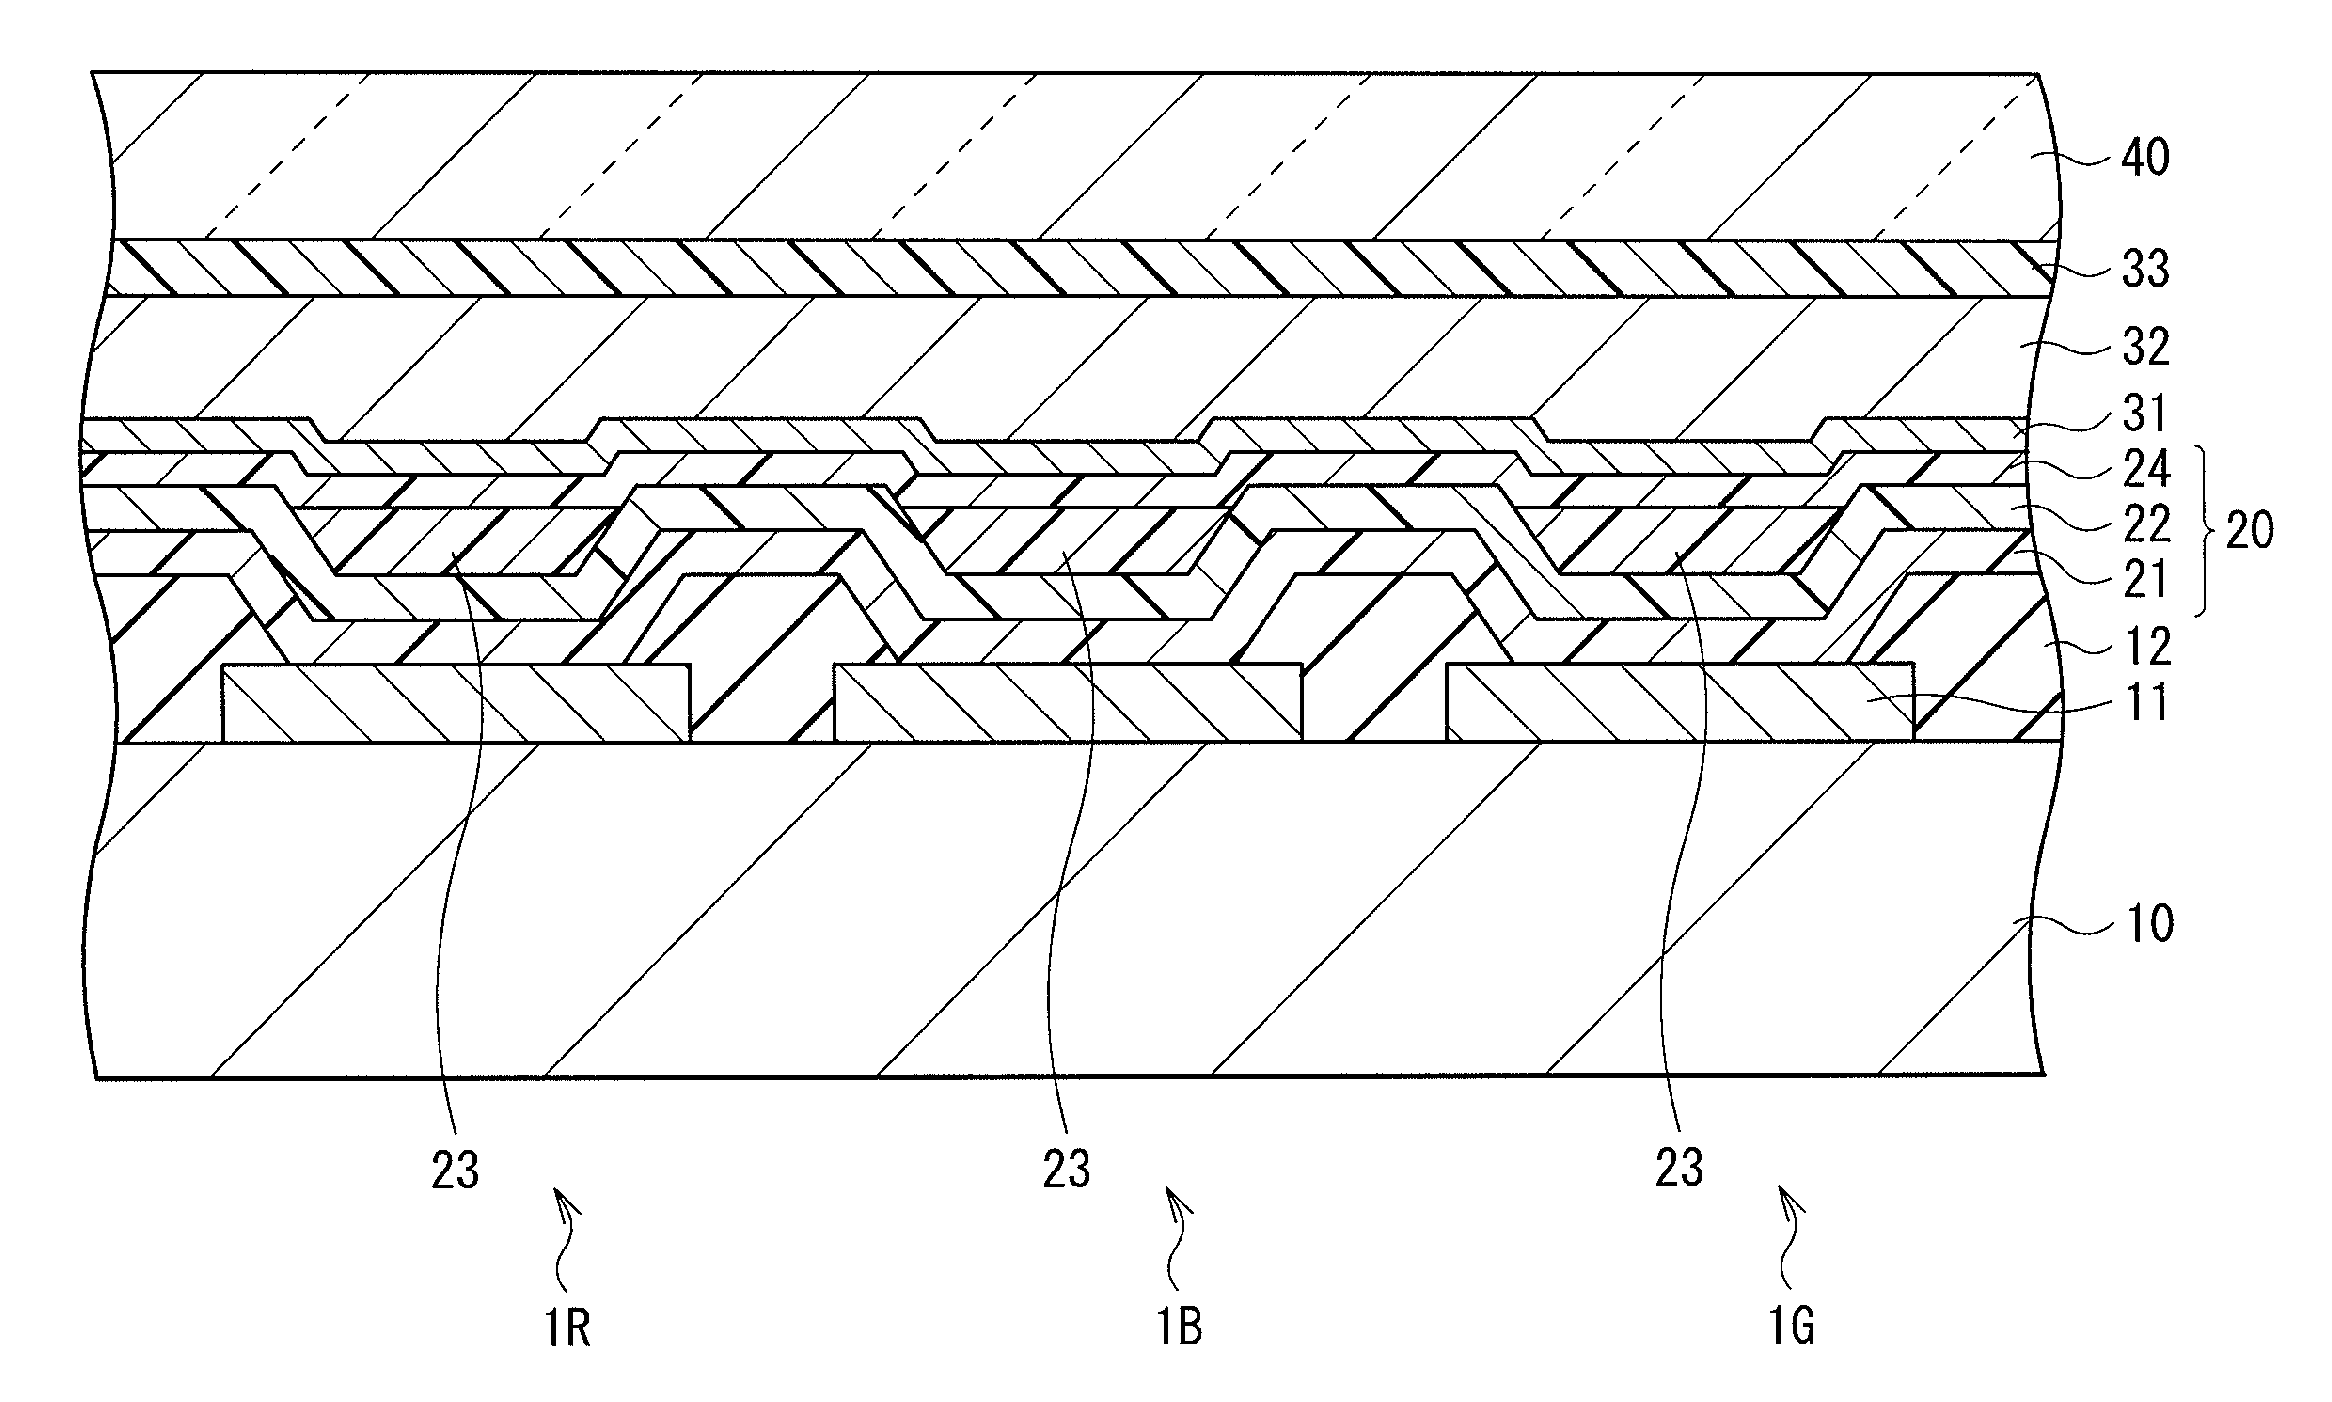 Organic electroluminescent element and display device